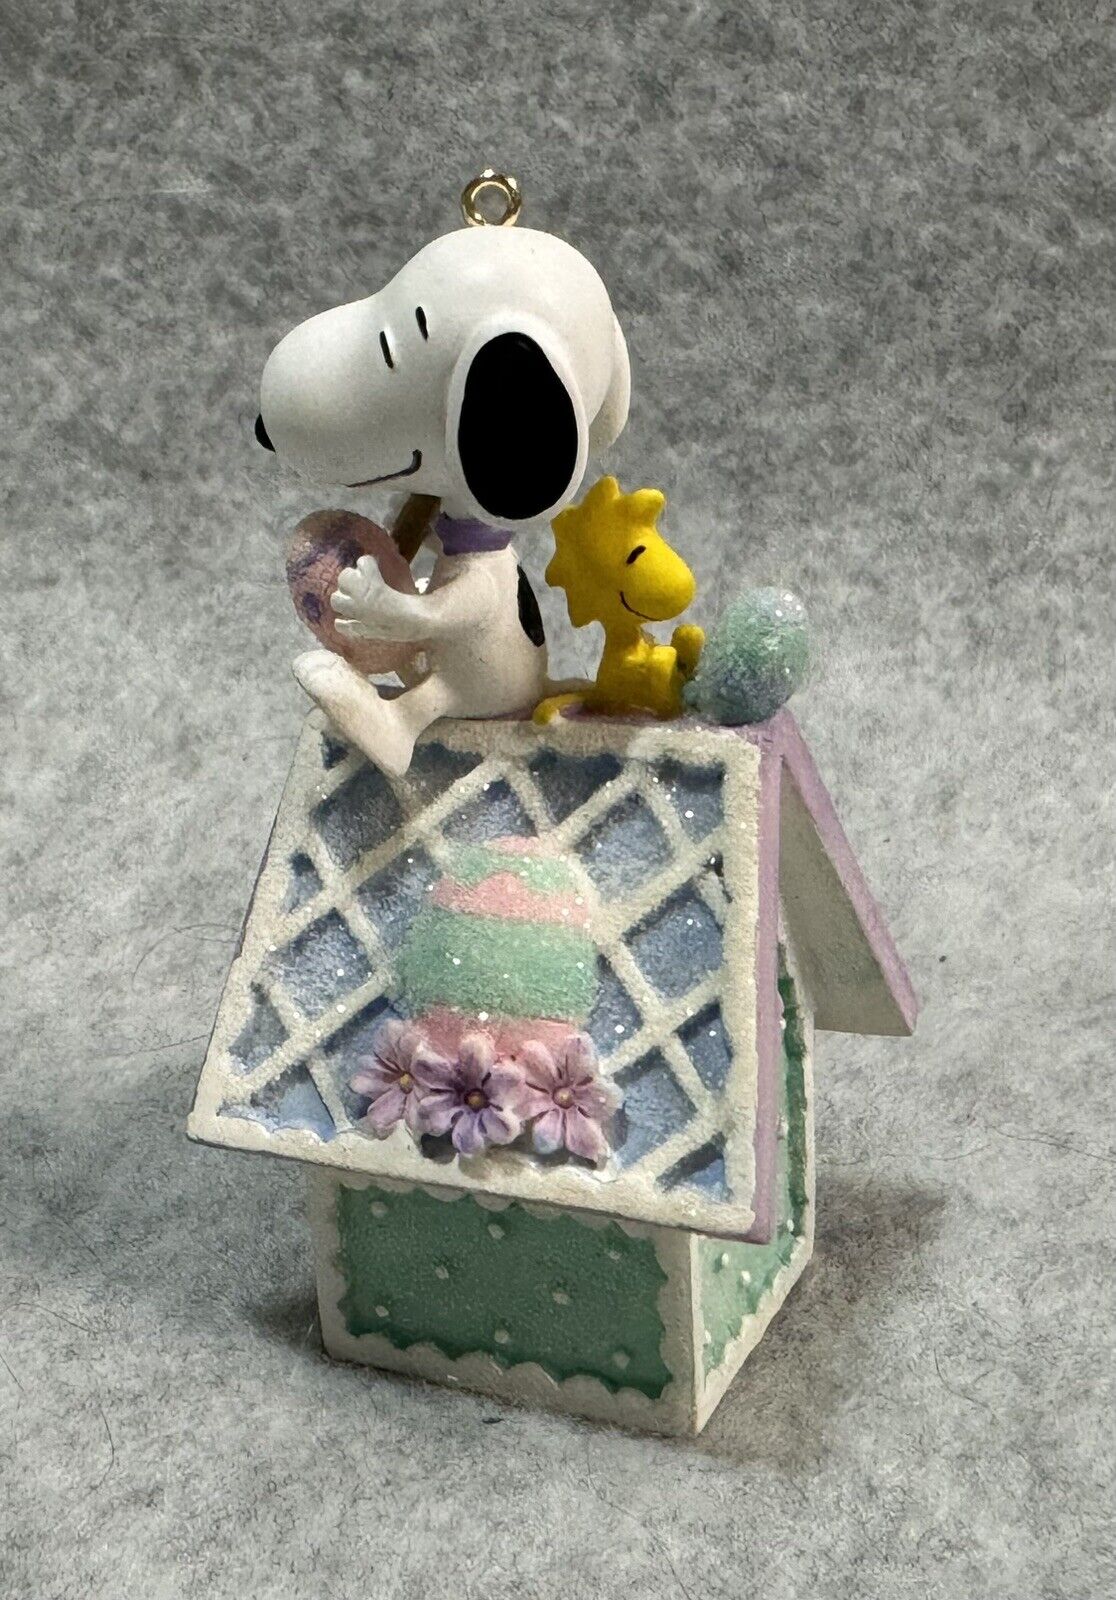 1994 Hallmark Easter Ornament “Easter Beagle” Charlie Brown & Snoopy PEANUTS 94